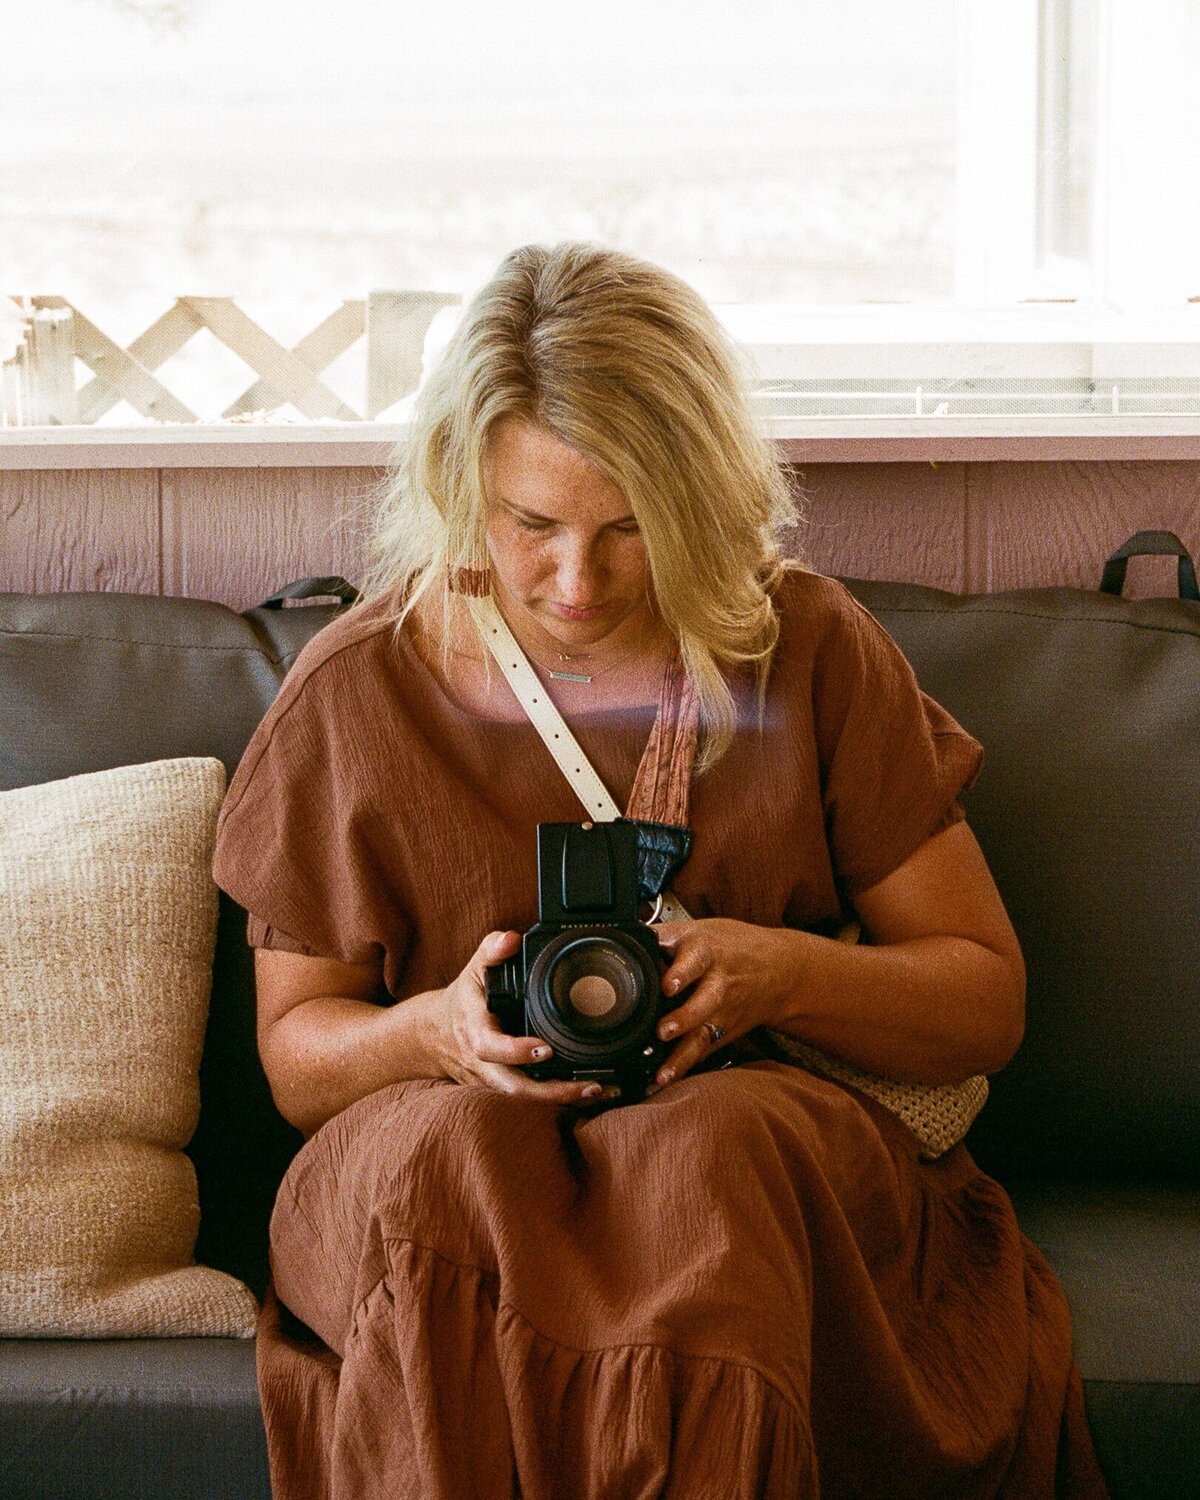 Woman looks at her camera while sitting on the couch